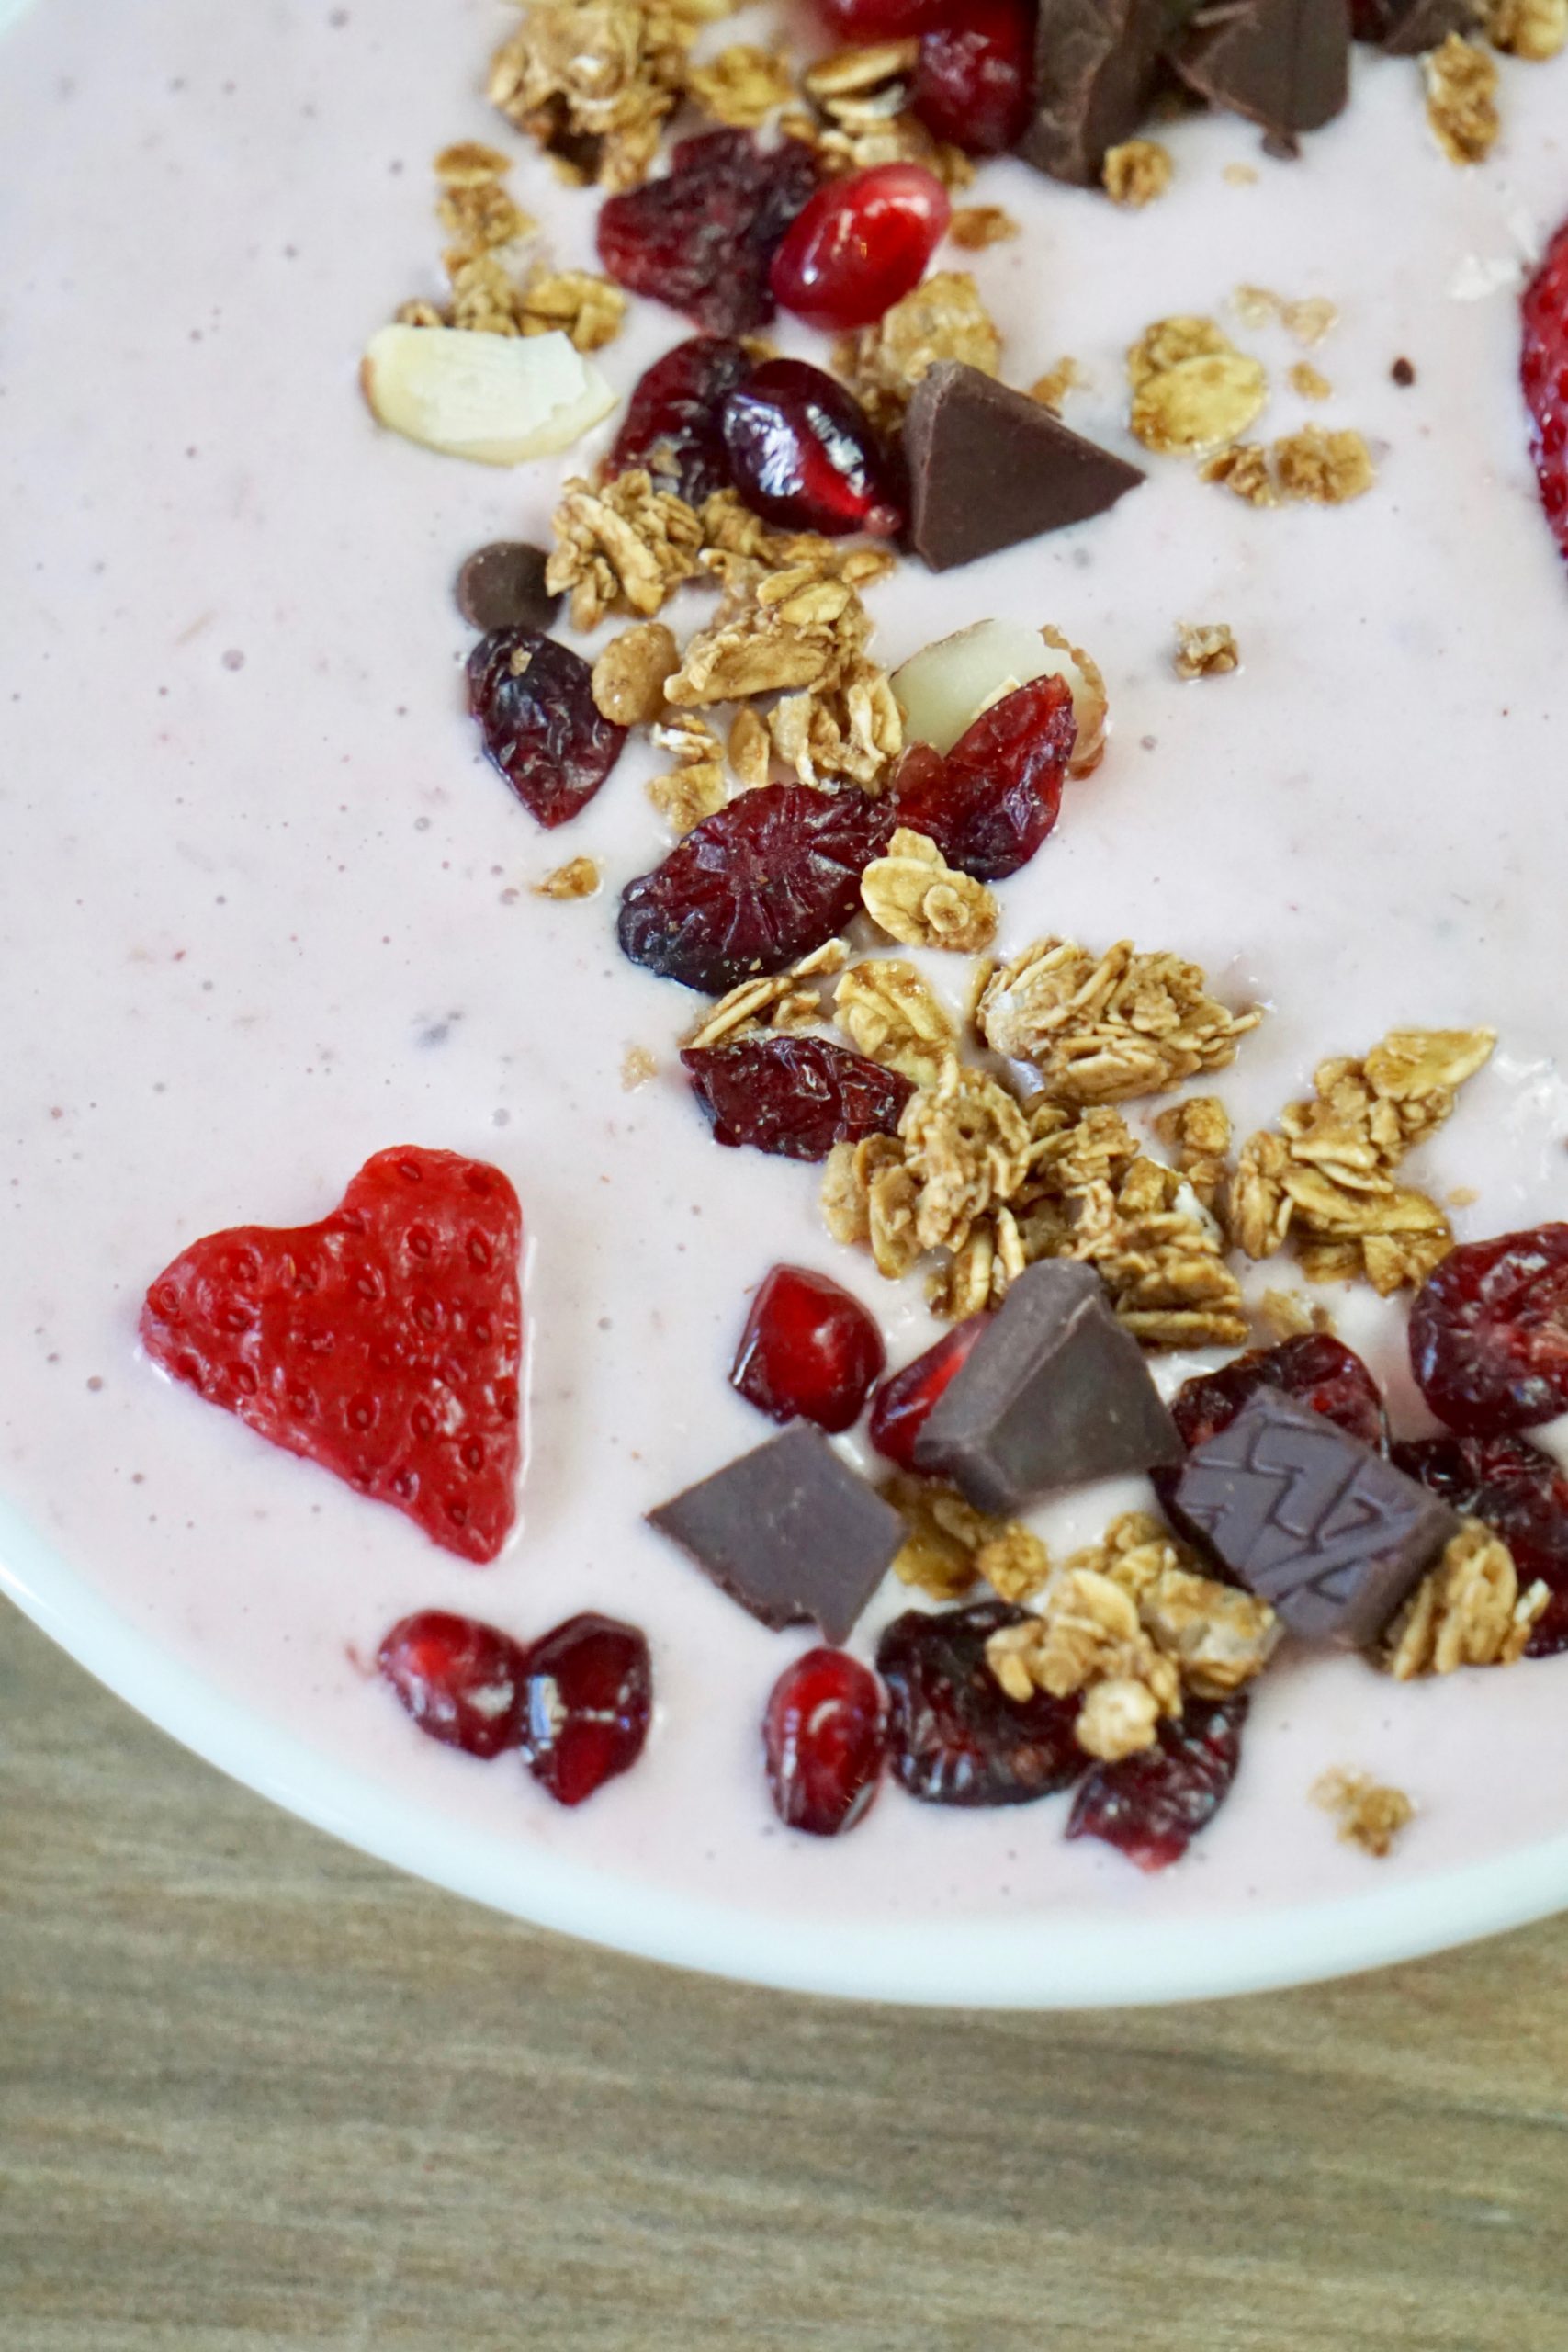 Best toppings for smoothie bowls